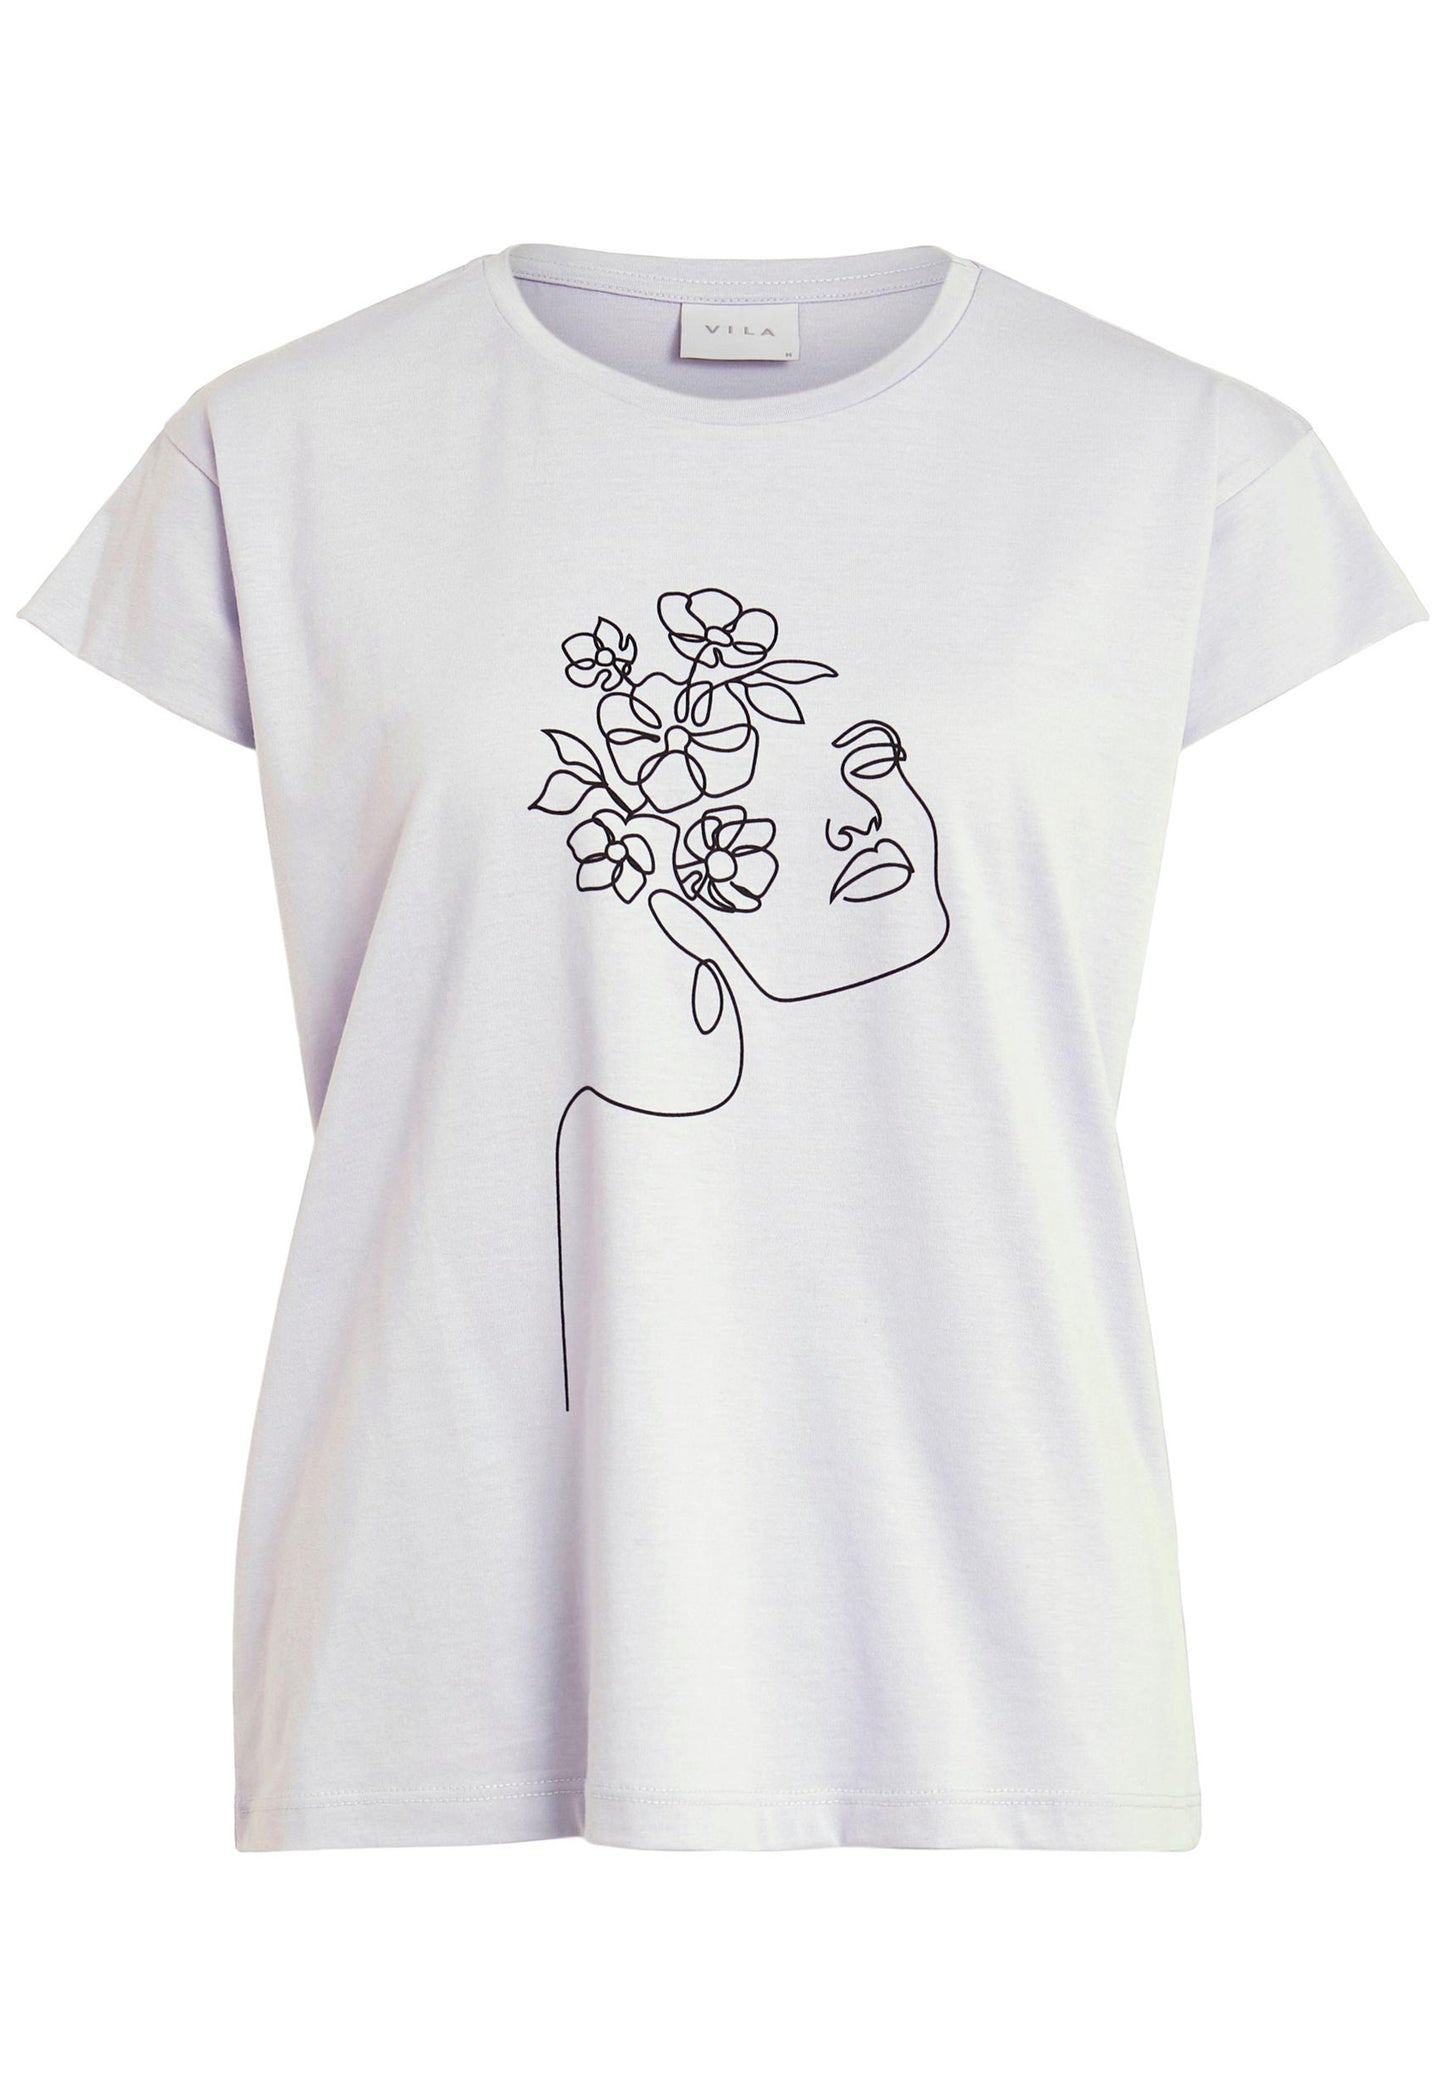 
                  
                    VILA Abstract One Line Woman's Face Drawing T-shirt in White - One Nation Clothing
                  
                